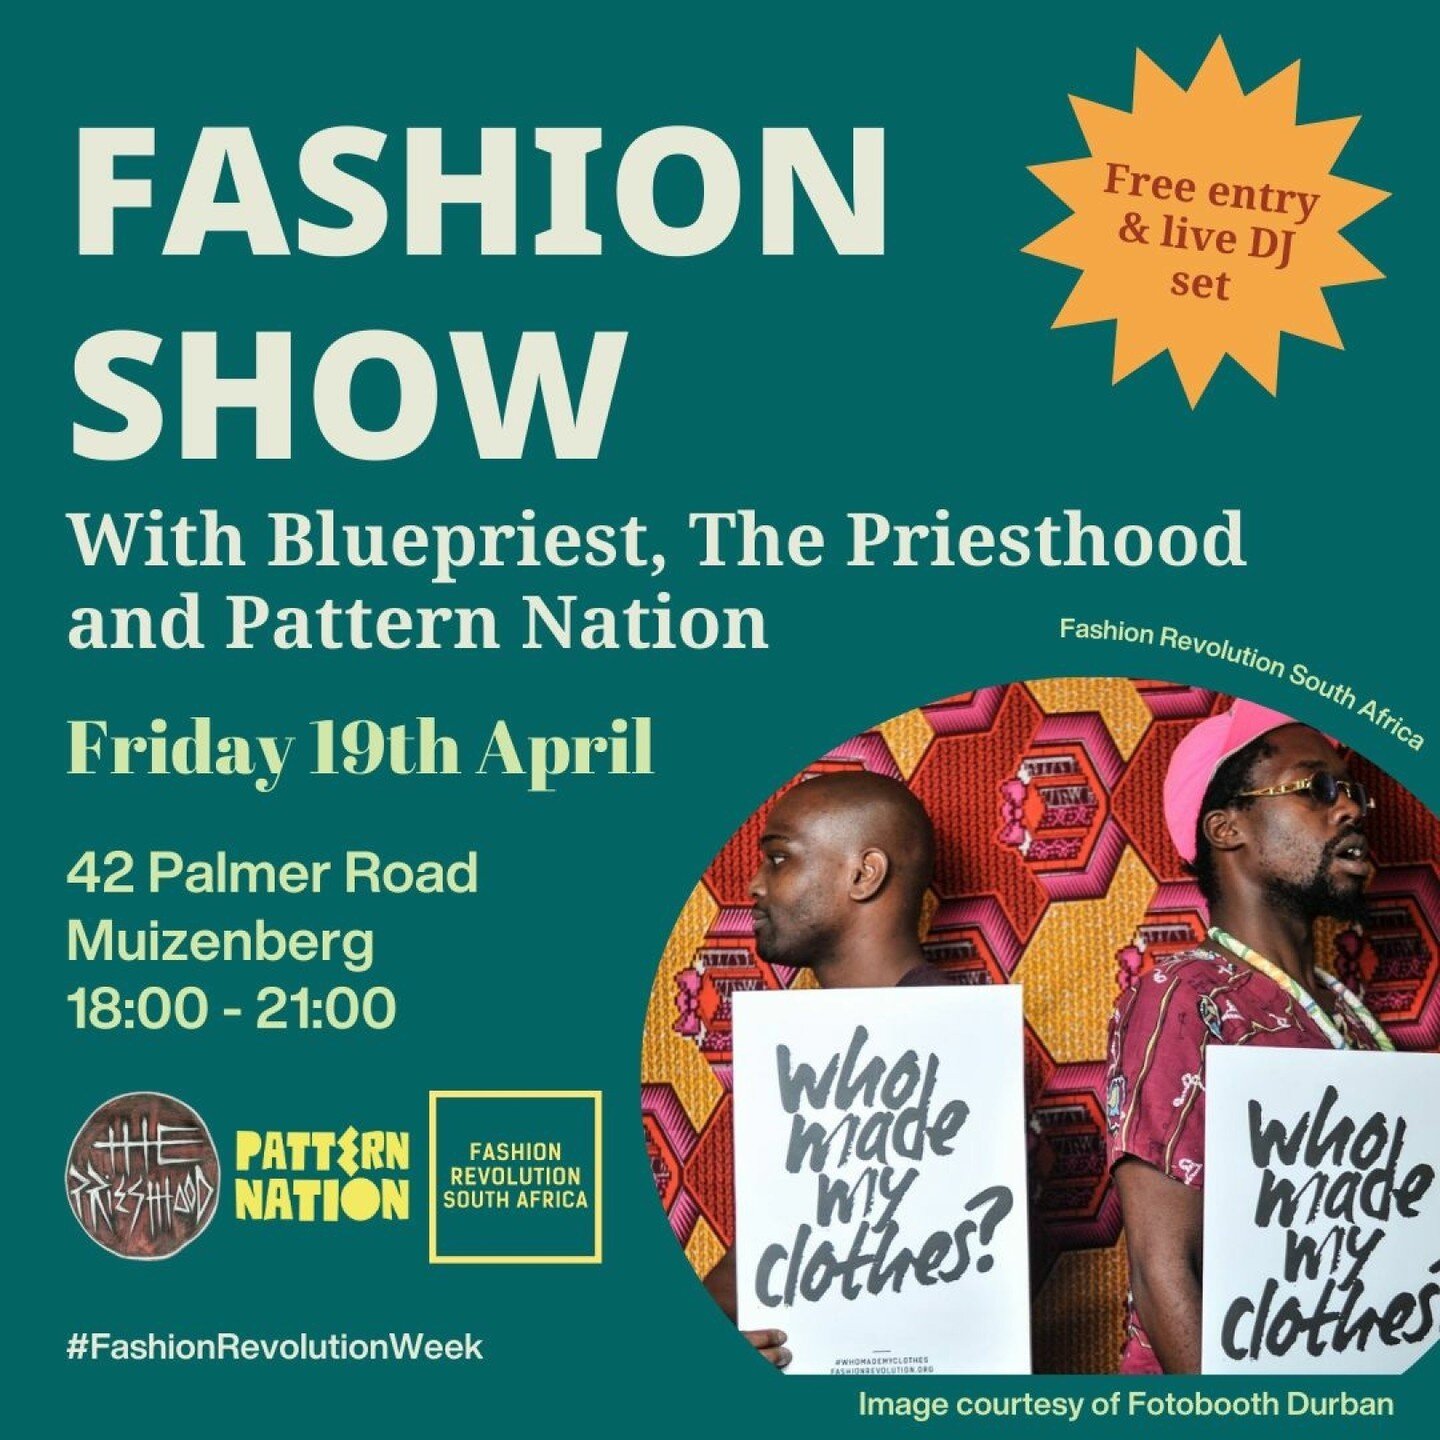 We are excited to announce that we are partnering with @fas_rev_southafrica &amp; @thepriesthood_cpt @Bluepriest_za to produce a Fashion Show for Fashion Revolution Week!! 

Start your weekend of activism by joining us on Friday, 19th April from 18:0